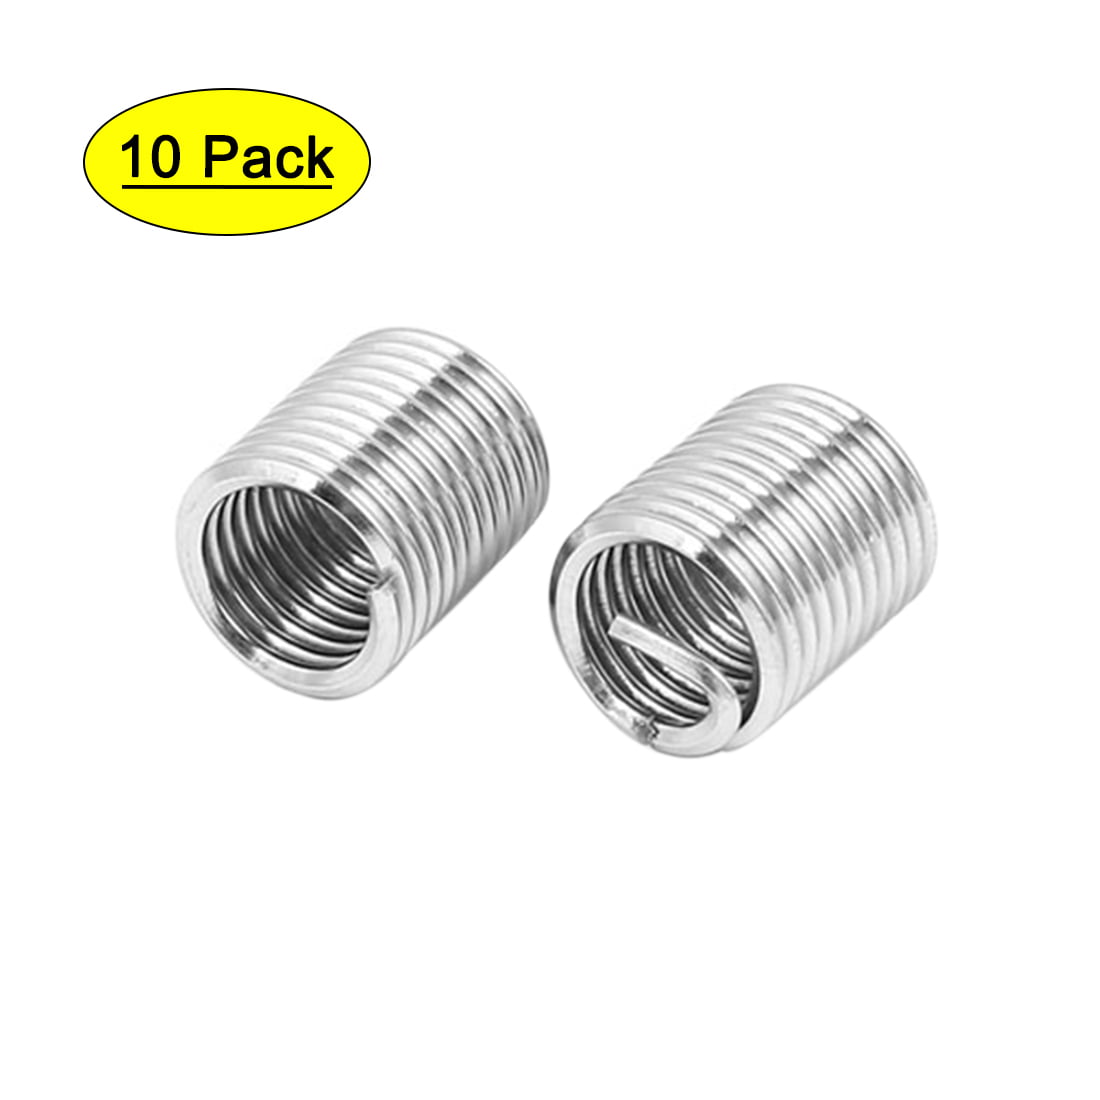 all lengths Fits Helicoil M14 x 1.5 V-Coil Wire Thread Repair Inserts 10PK 